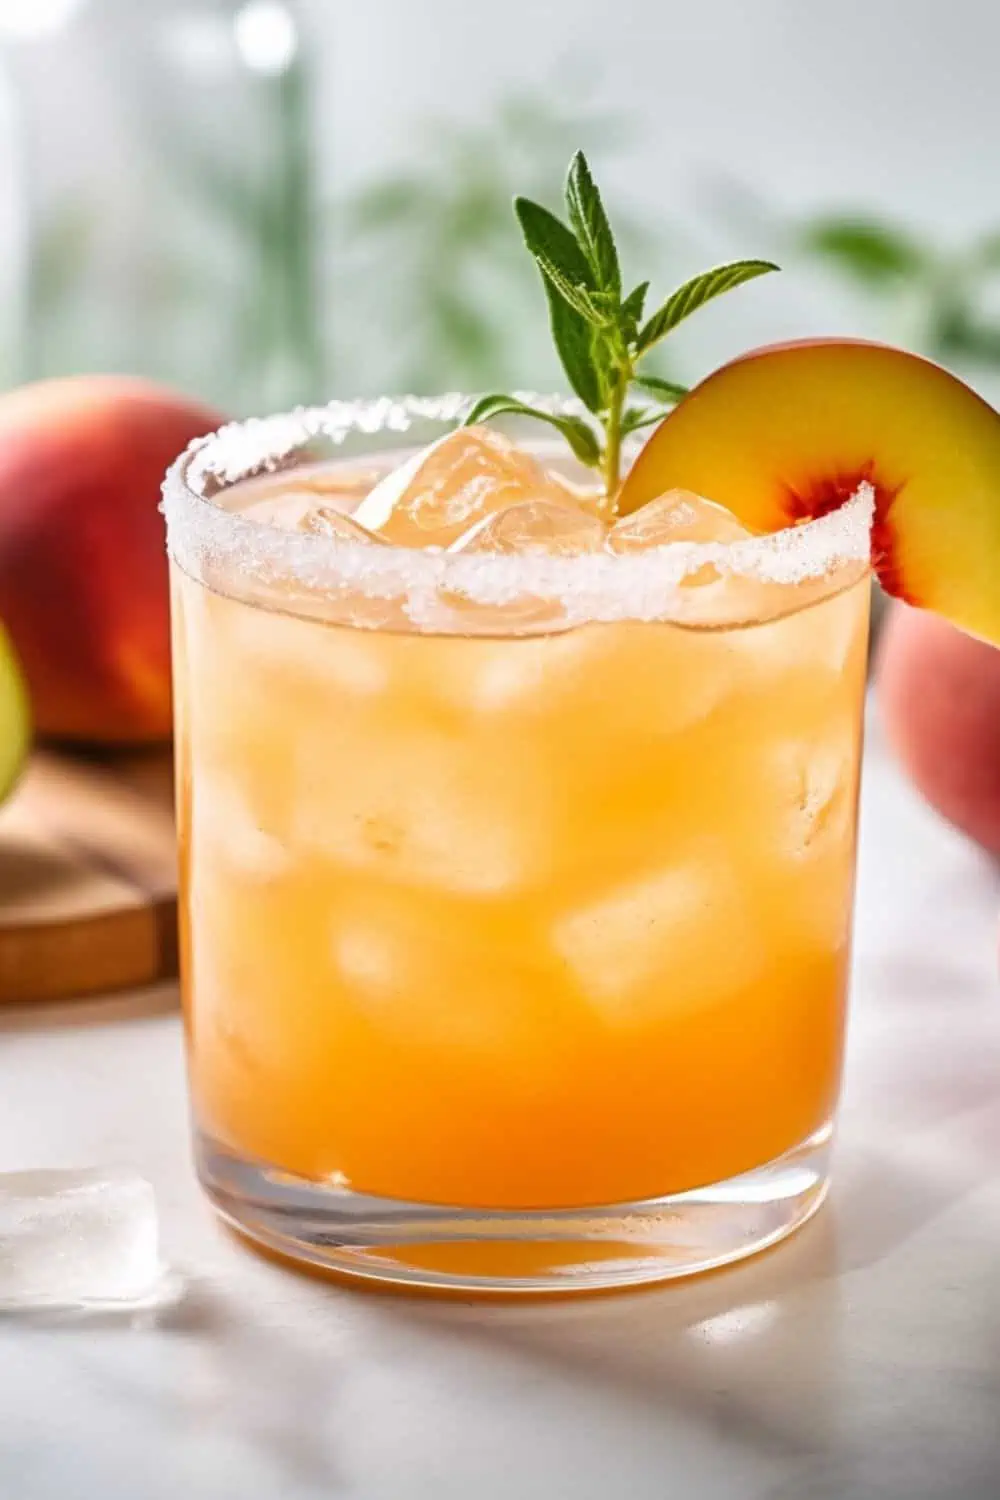 Peach margarita garnished with rosemary and peach.